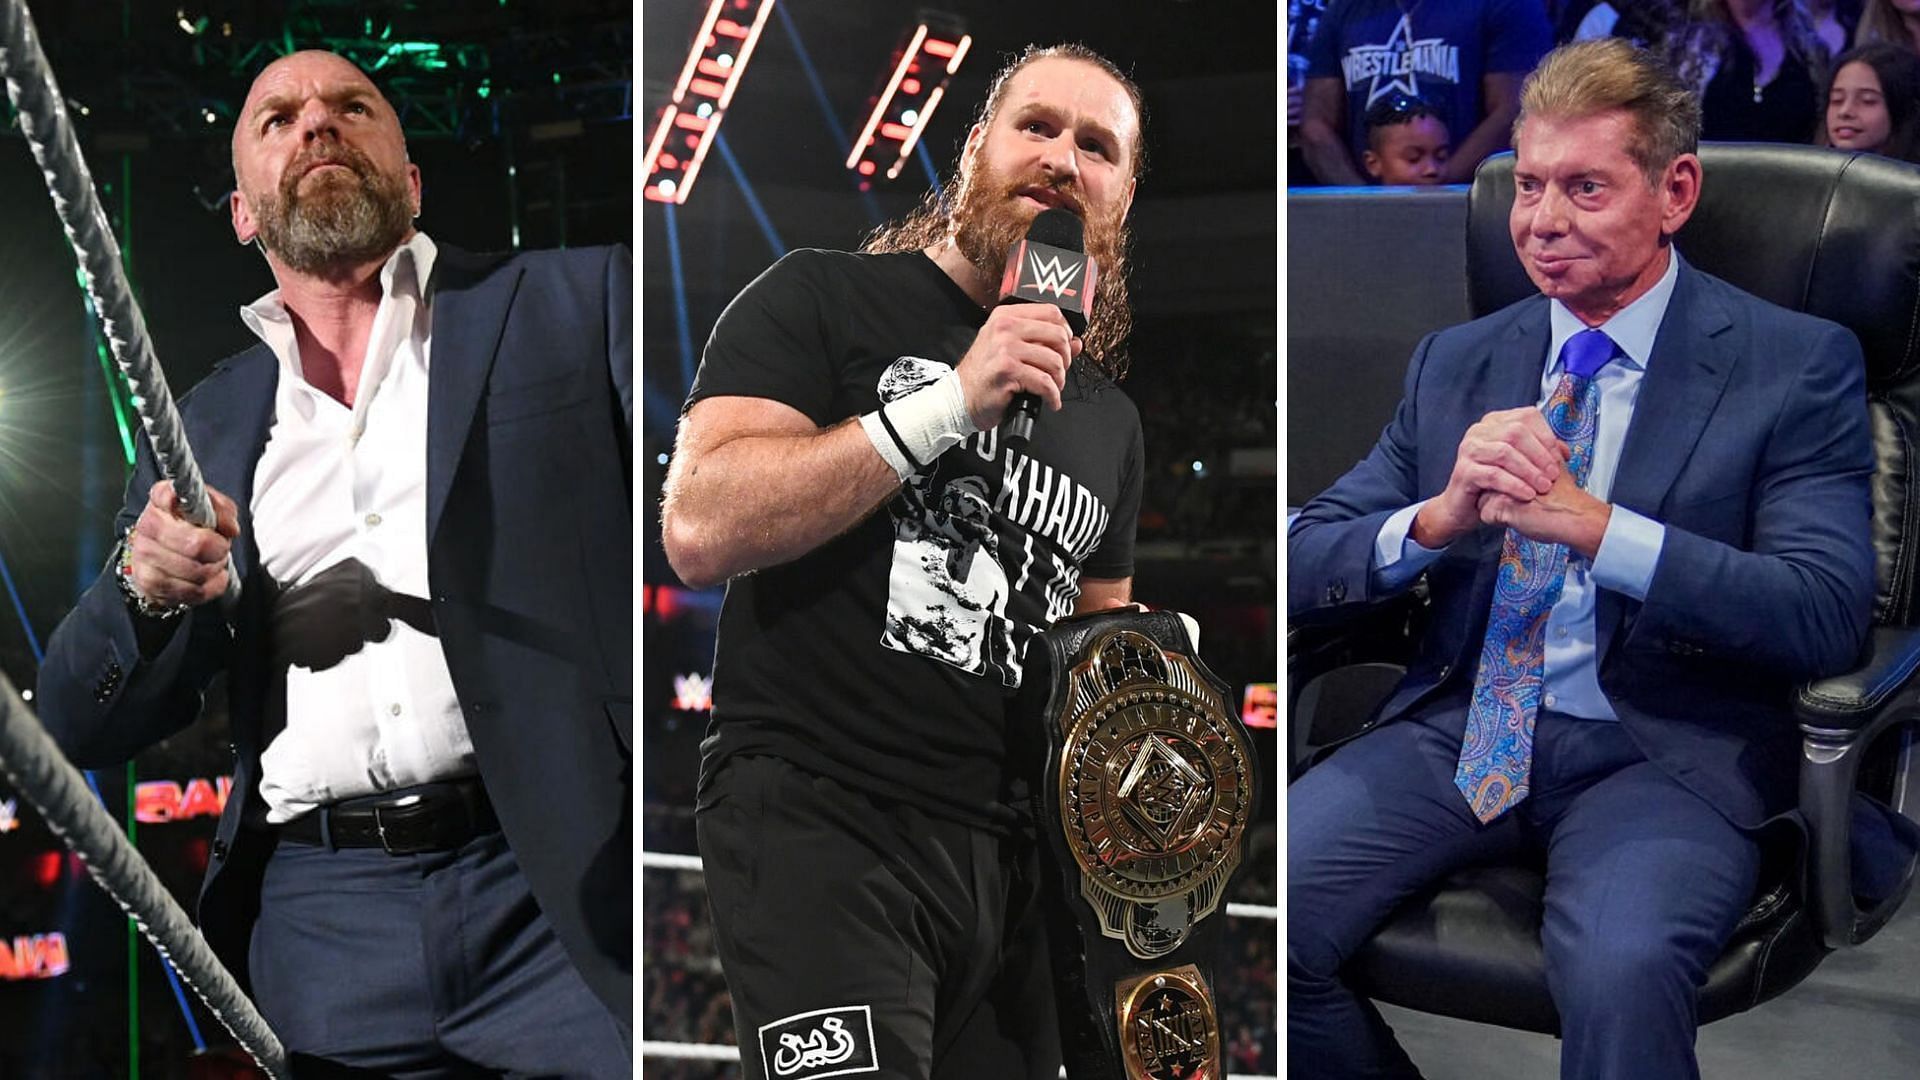 Sami Zayn has worked both under Vince McMahon and Triple H